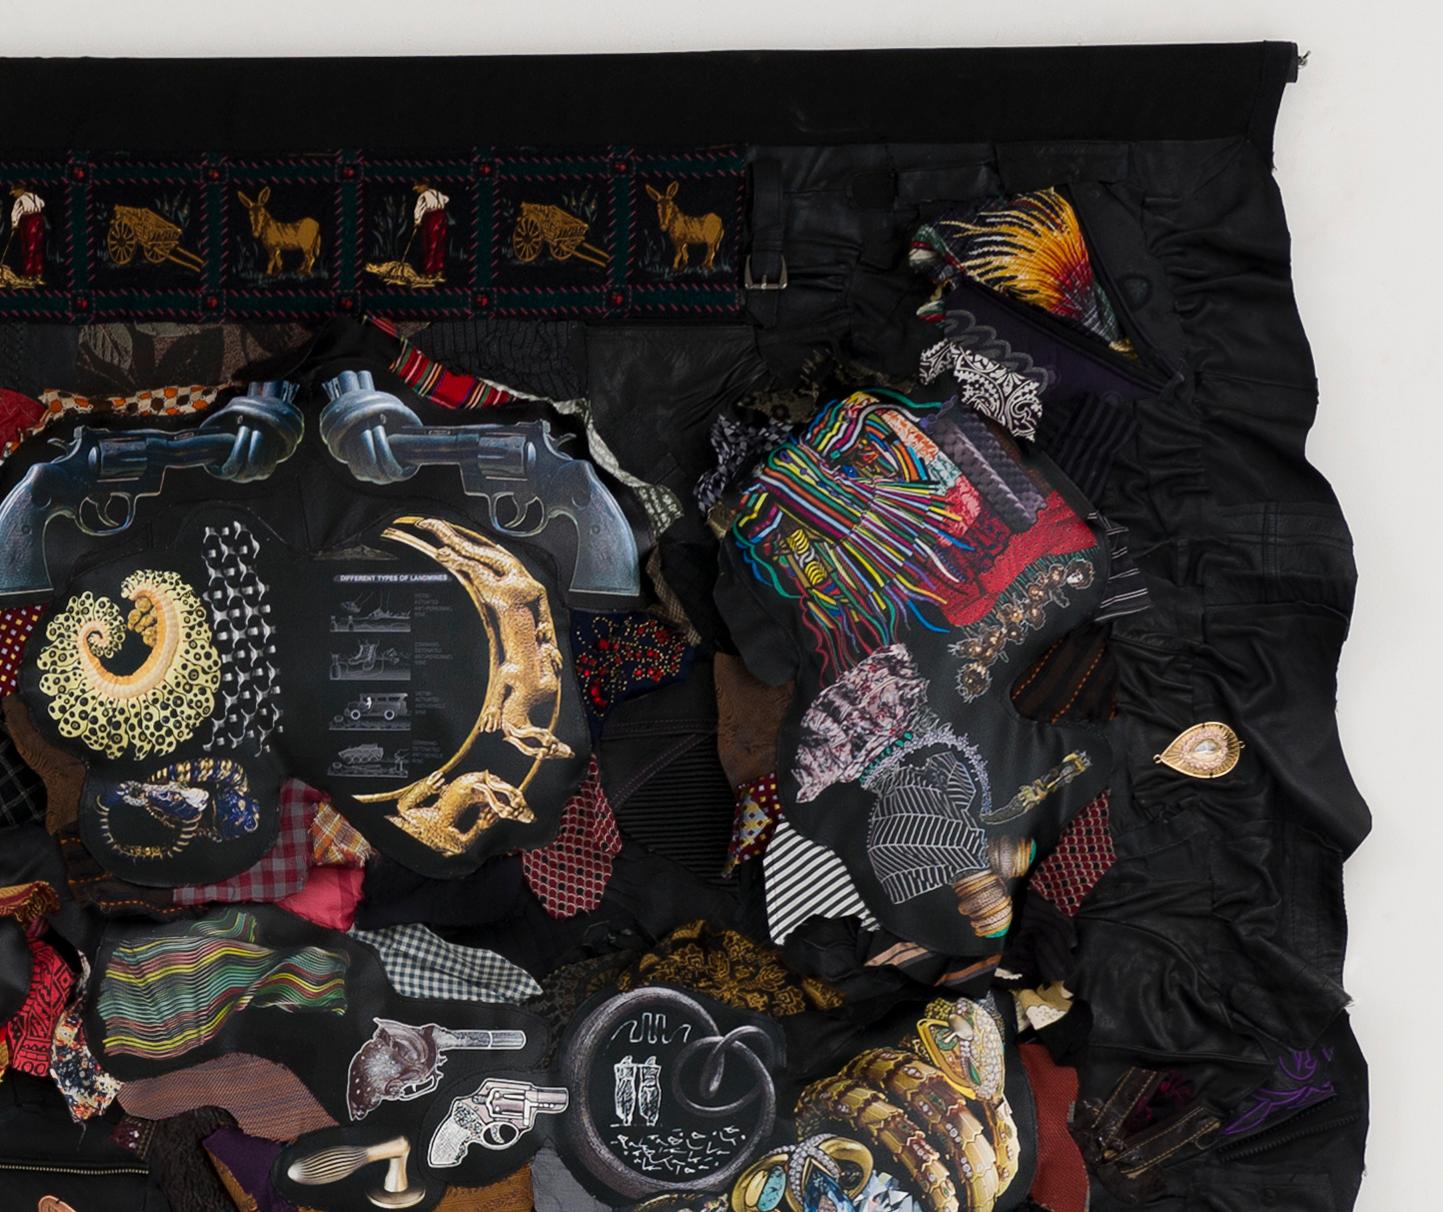 Linda Stein, Growing Up Female 931 - Feminist Contemporary Fabric Leather Sculptural Tapestry 

Growing Up Female: Jewelry, Guns, Landmines 931 is from Linda Stein's Sexism series, which advocates an expanded perspective of gender constructions--one